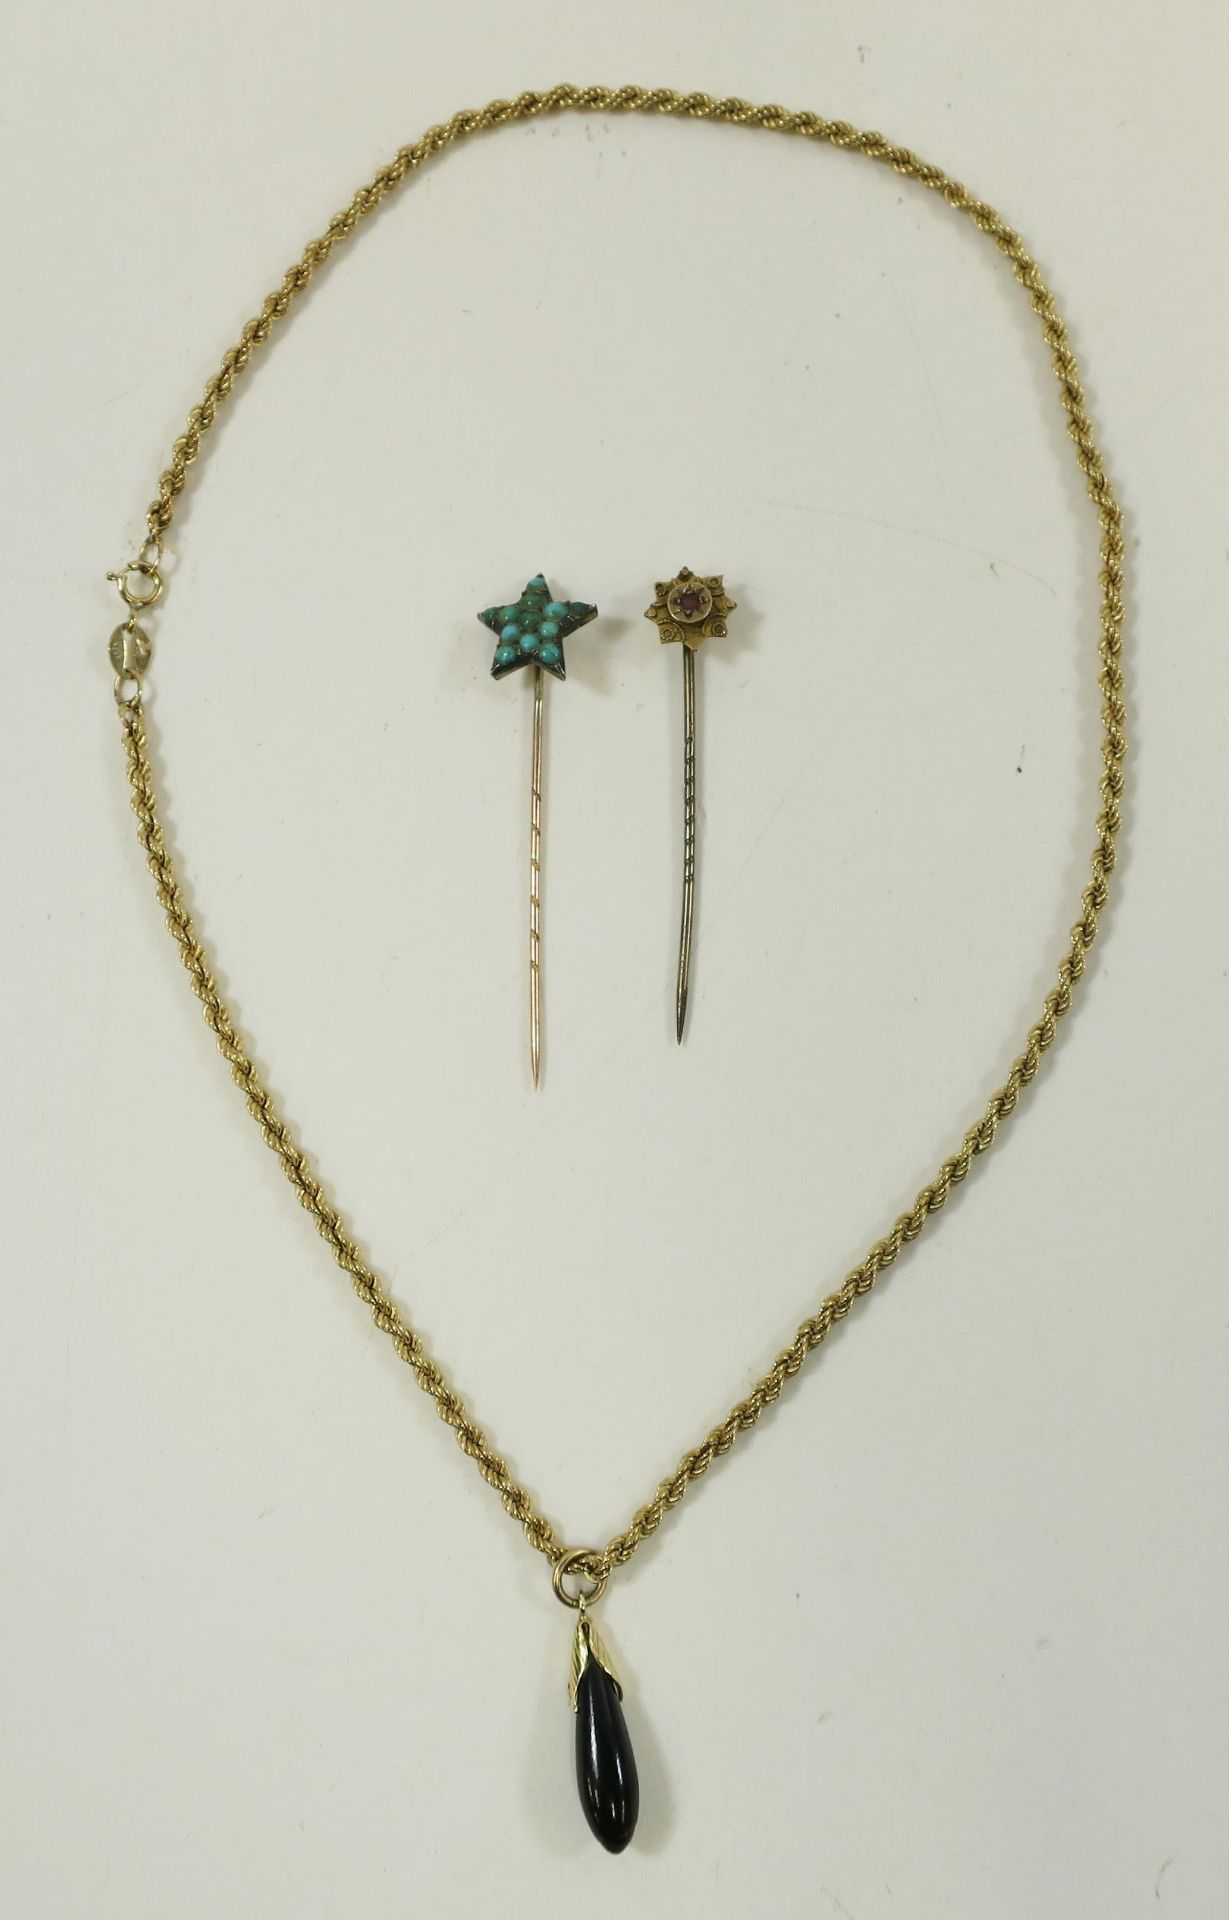 A 9ct Gold Rope Twist Chain (40cm long, 2.8gms) with a drop pendant in the form of a fruit with Gold